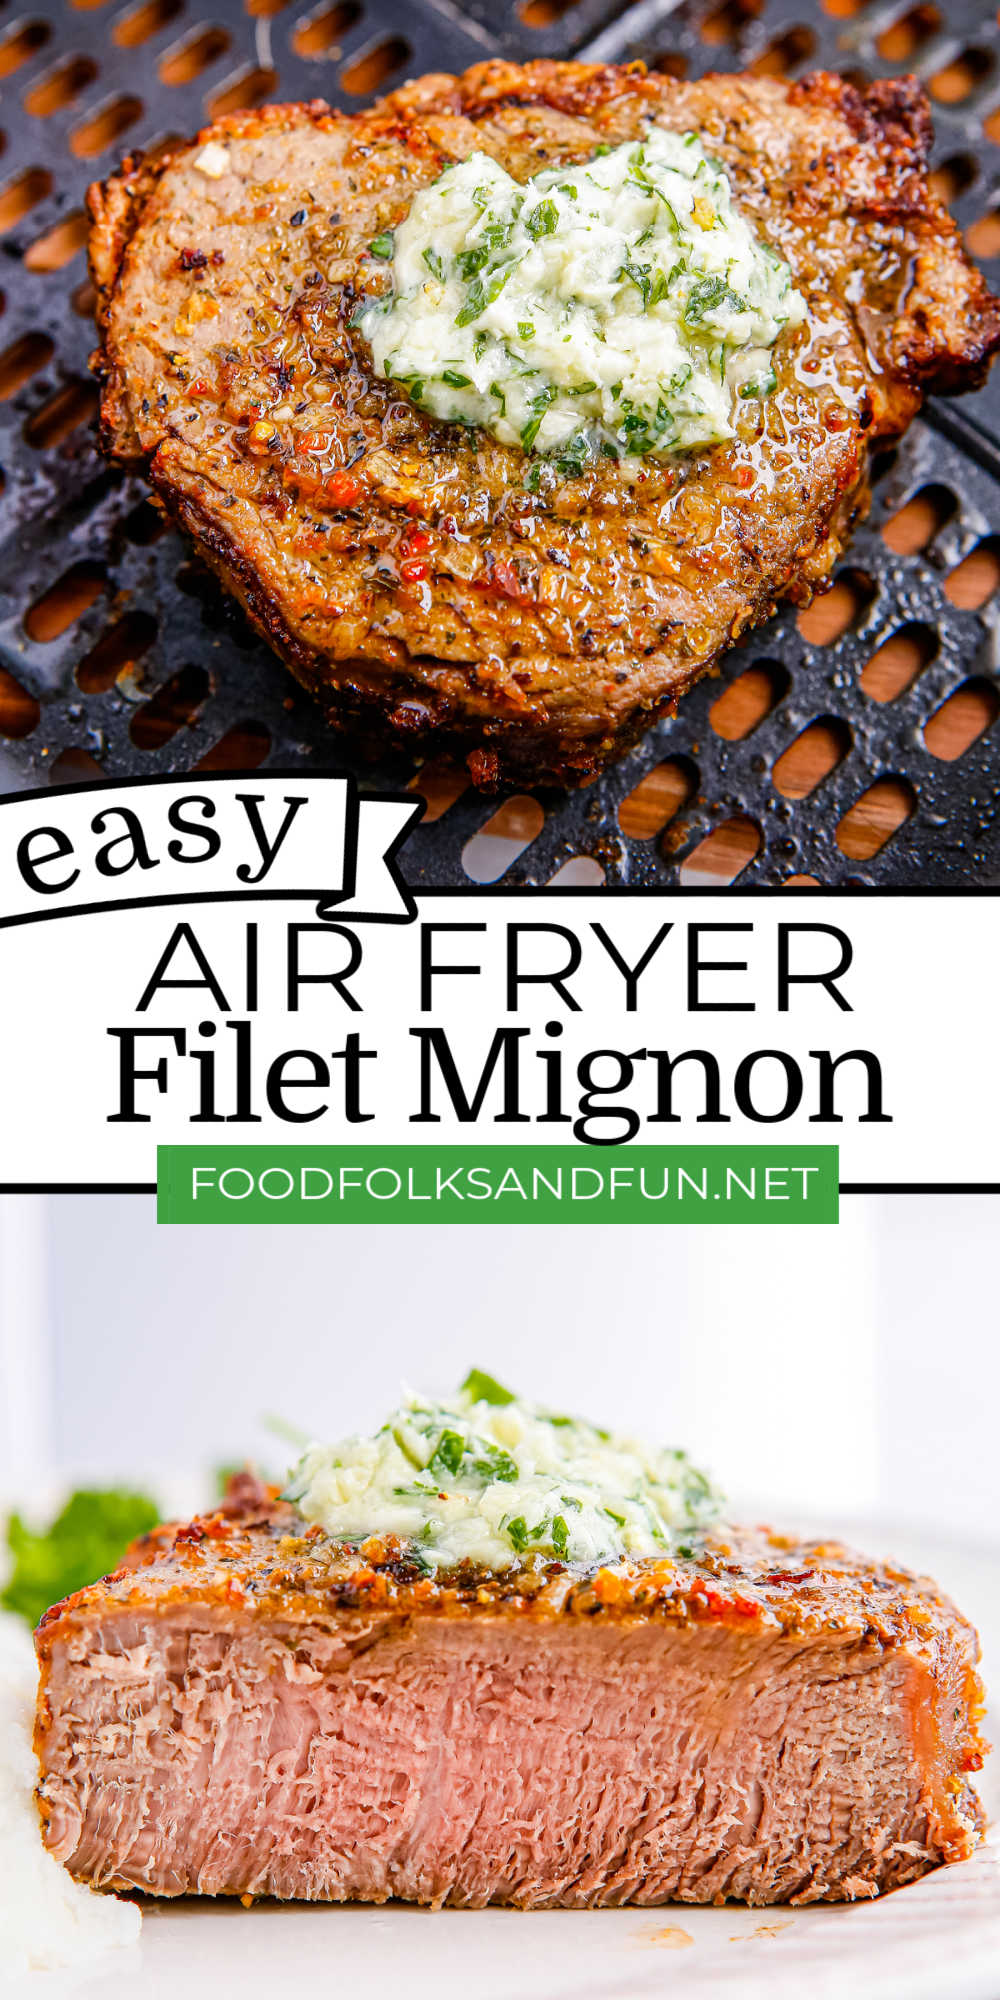 This Air Fryer Filet Mignon recipe is delicious, elegant, and excellent company fare. The best part is that it takes a minimum of time and effort to prepare. via @foodfolksandfun